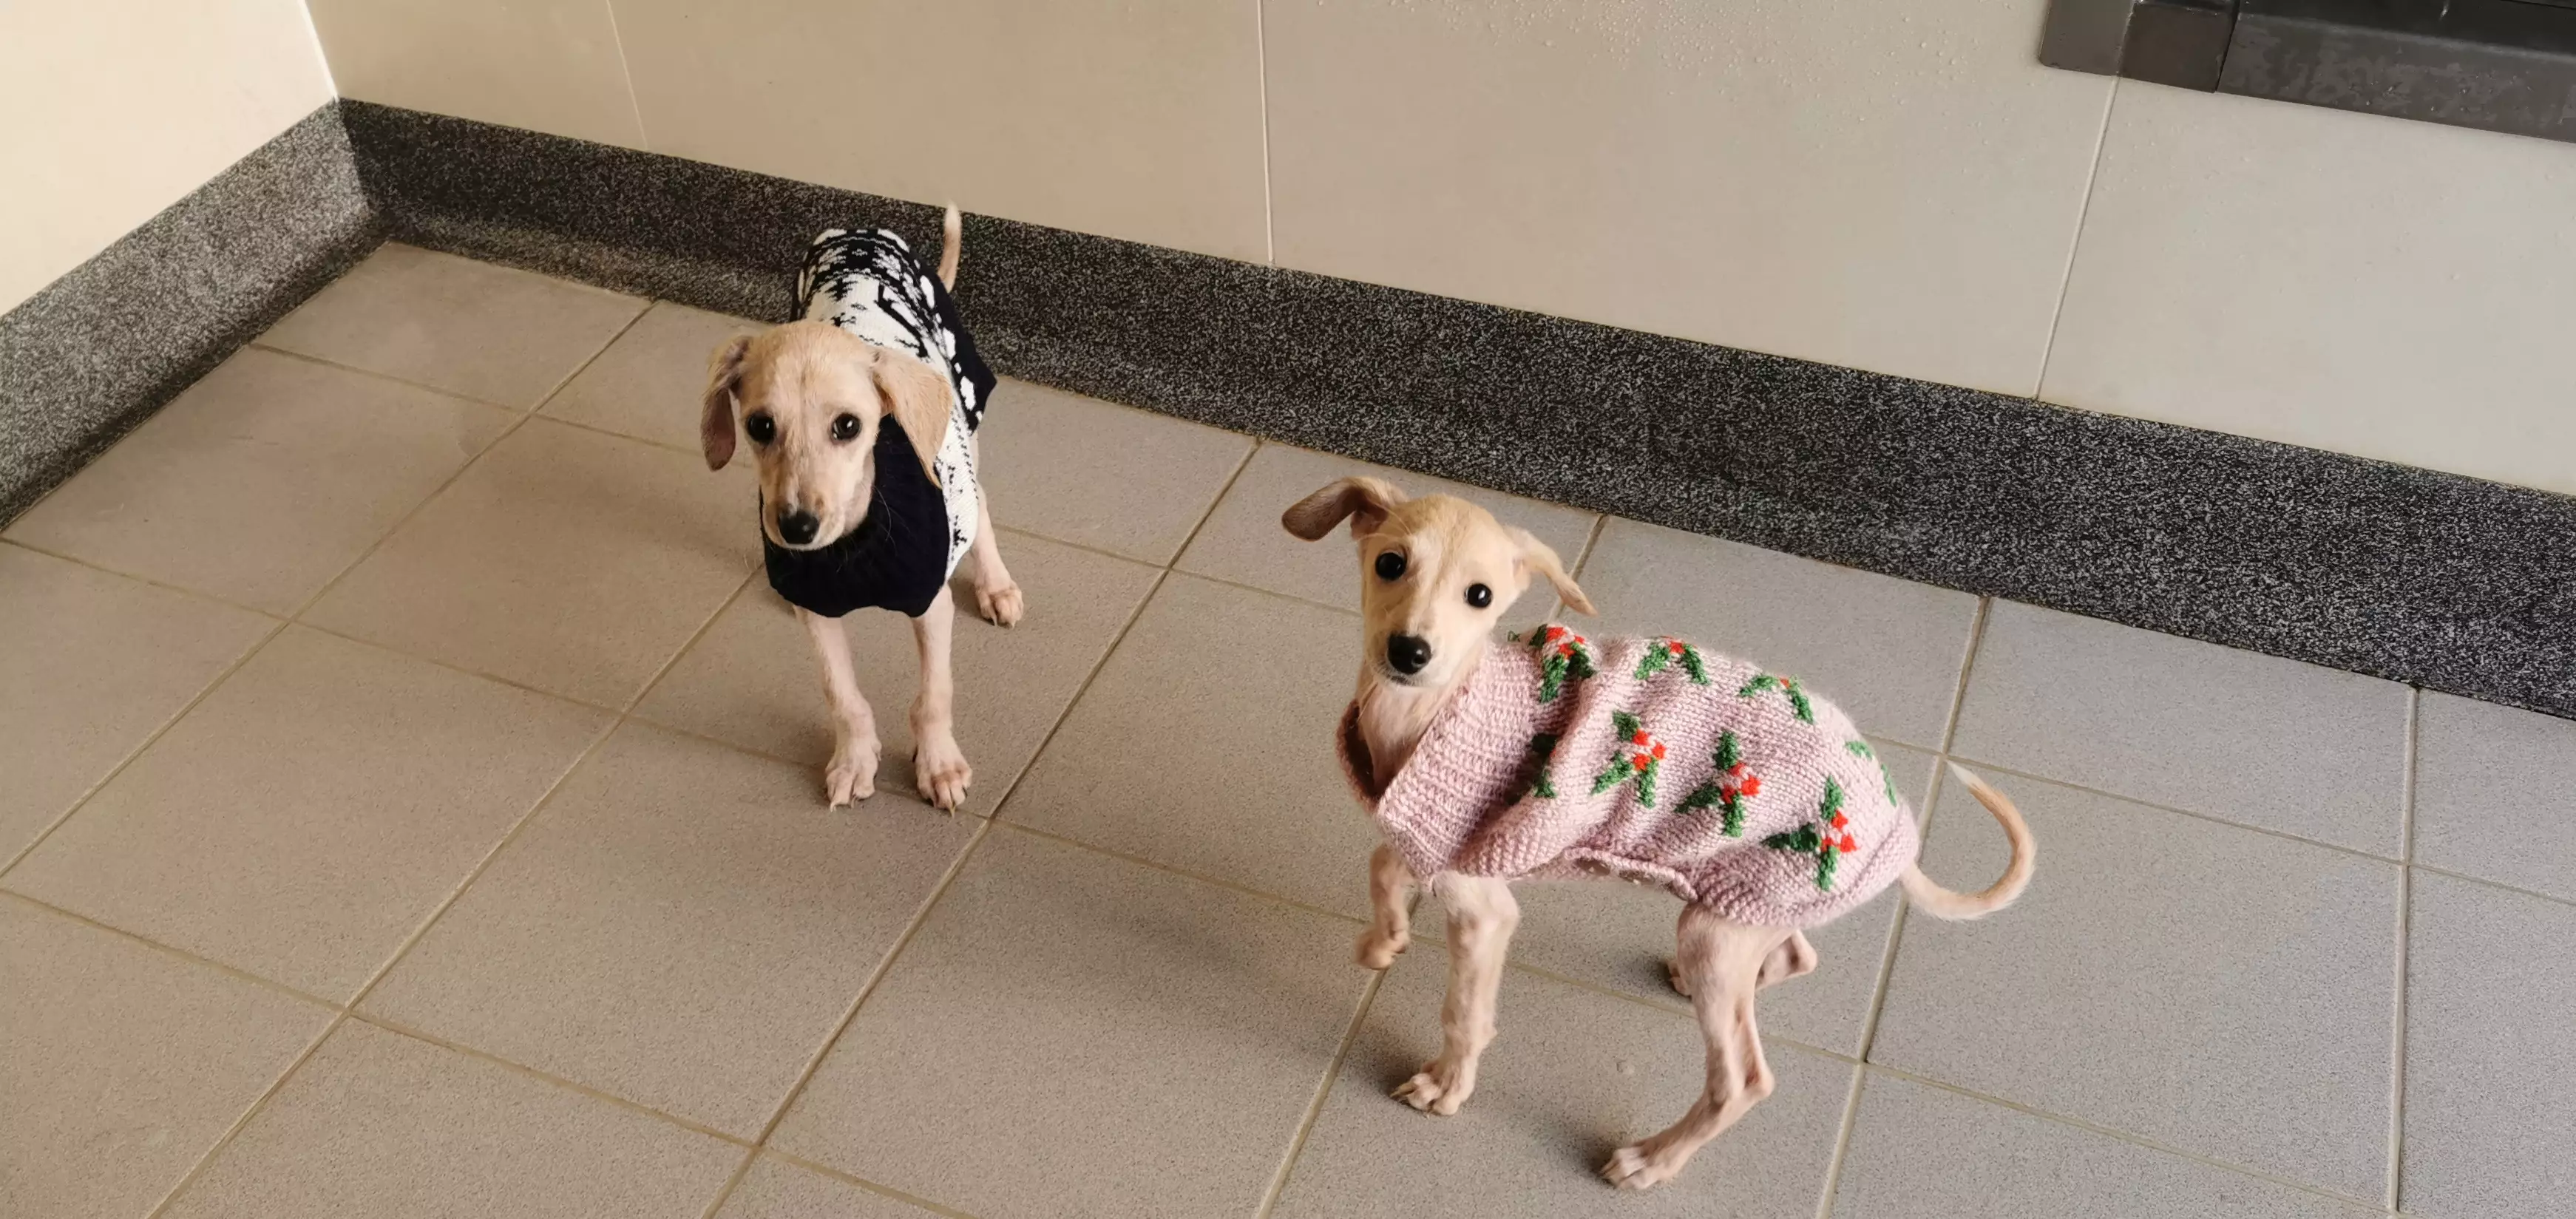 Holly and Ivy will need adopting in the new year (